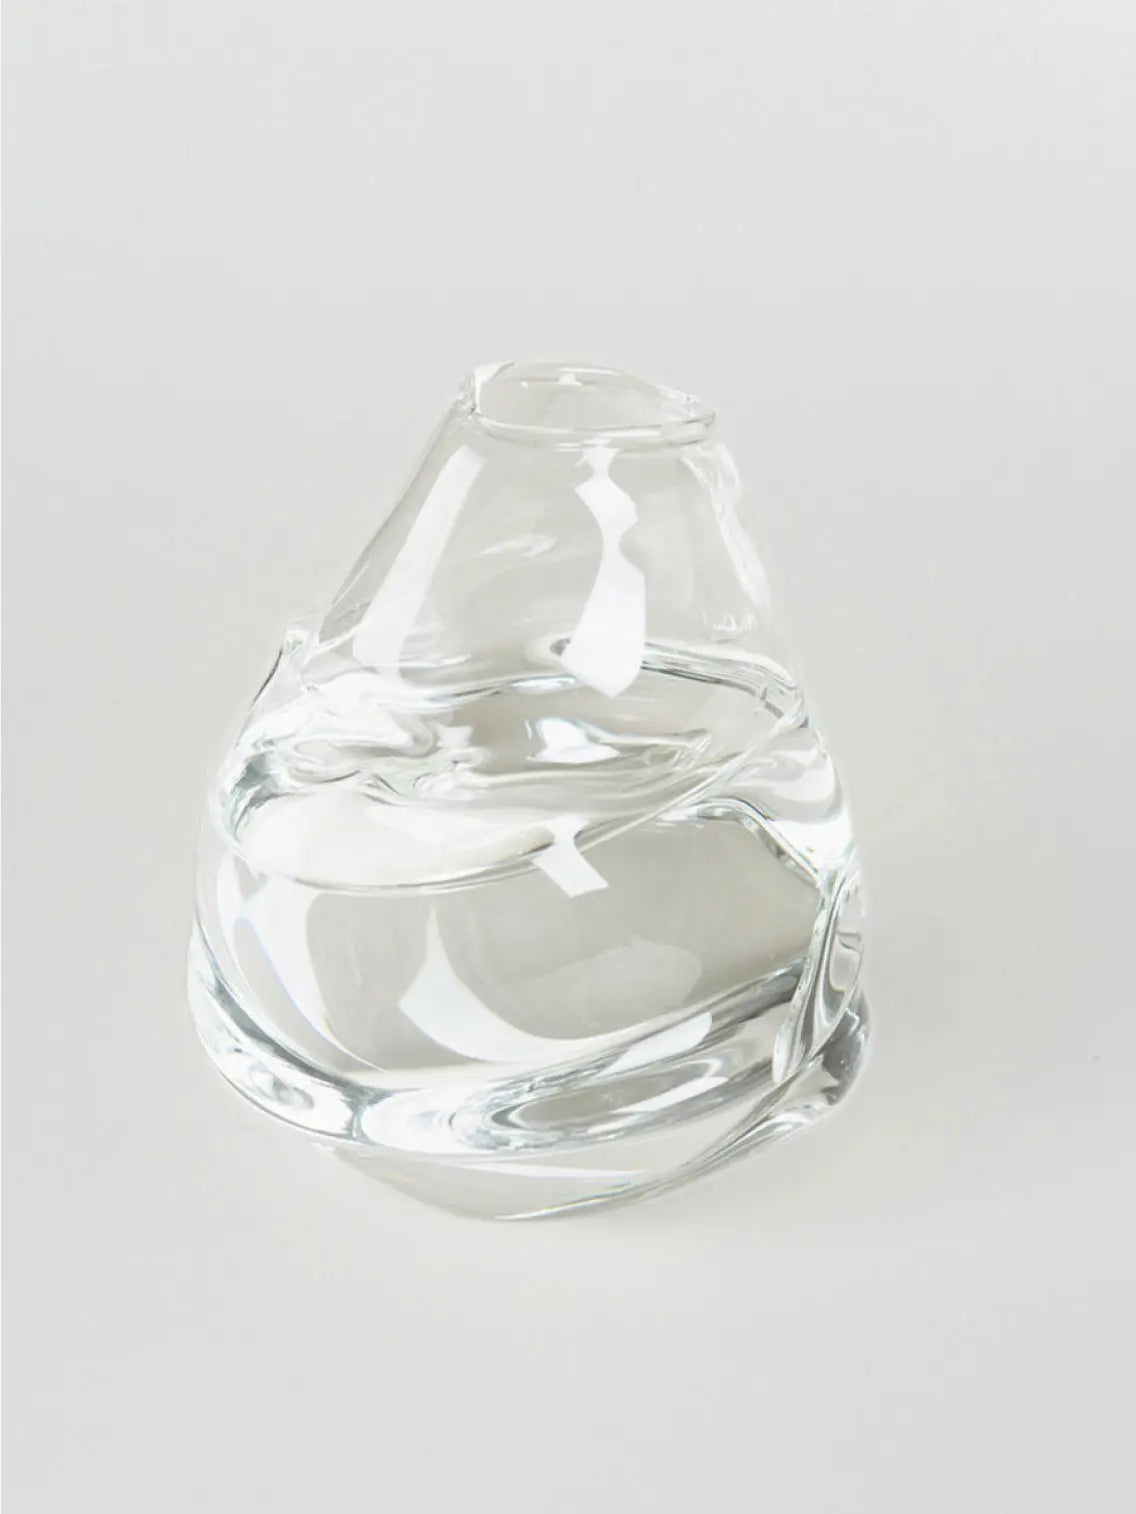 A small, clear glass vase with a slightly tilted, asymmetrical shape is shown against a plain white background. The vase has a smooth, modern design and is empty inside—a perfect piece you might find at Bassalstore in Barcelona. This is the Ben Jor Vase Clear by Nathalie Schreckenberg.